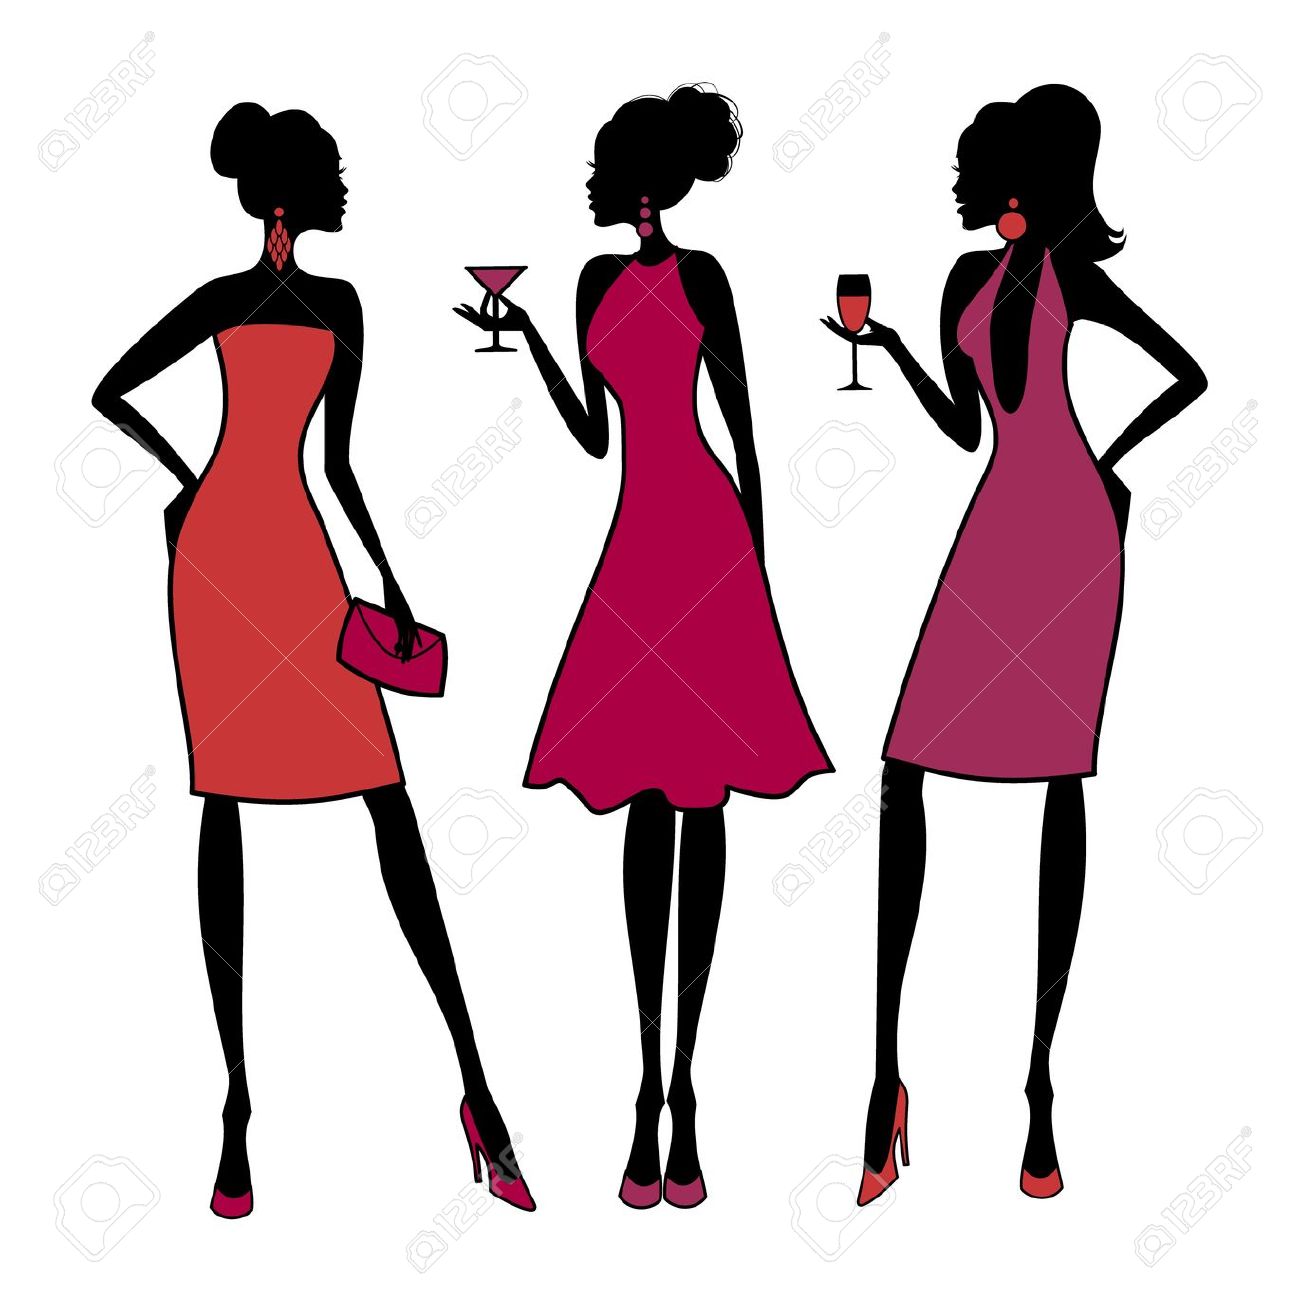 Girls Night Out Clip Art Clip